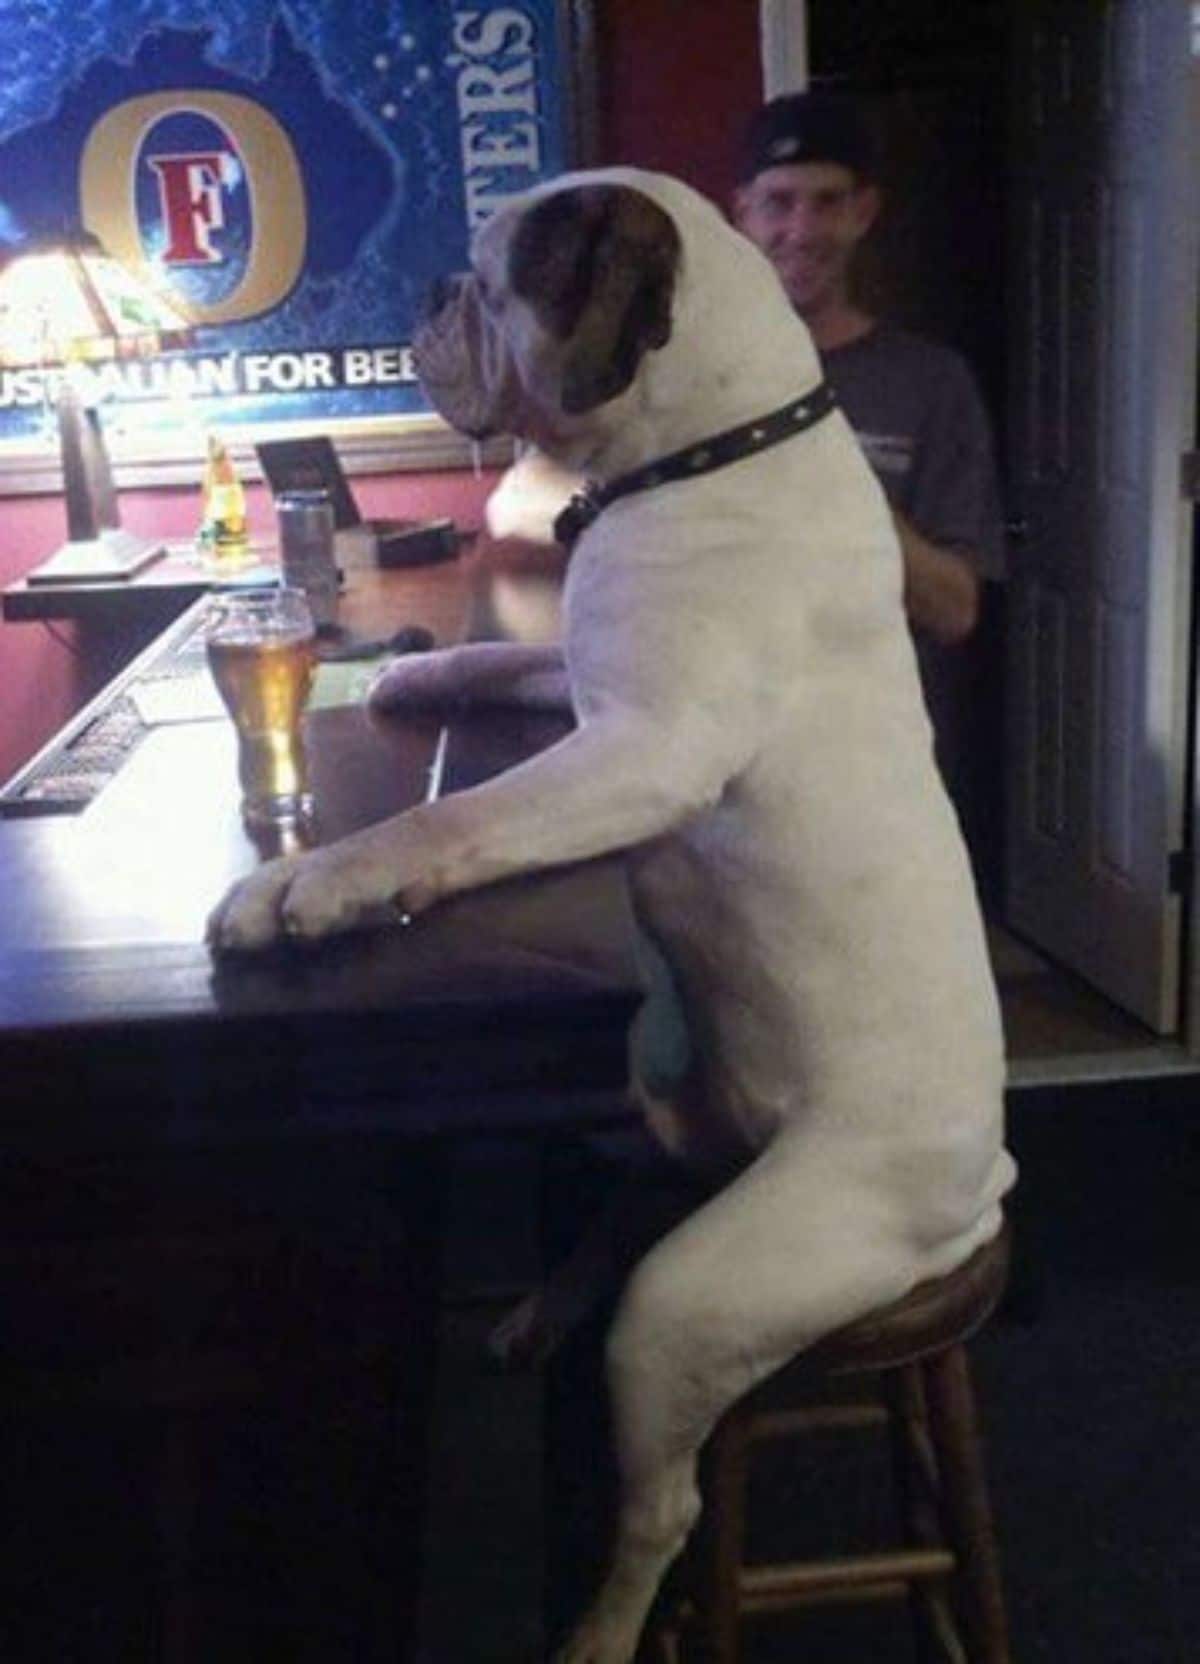 large white dog with black ears sitting on a bar stool at a bar with a glass of liquid in front